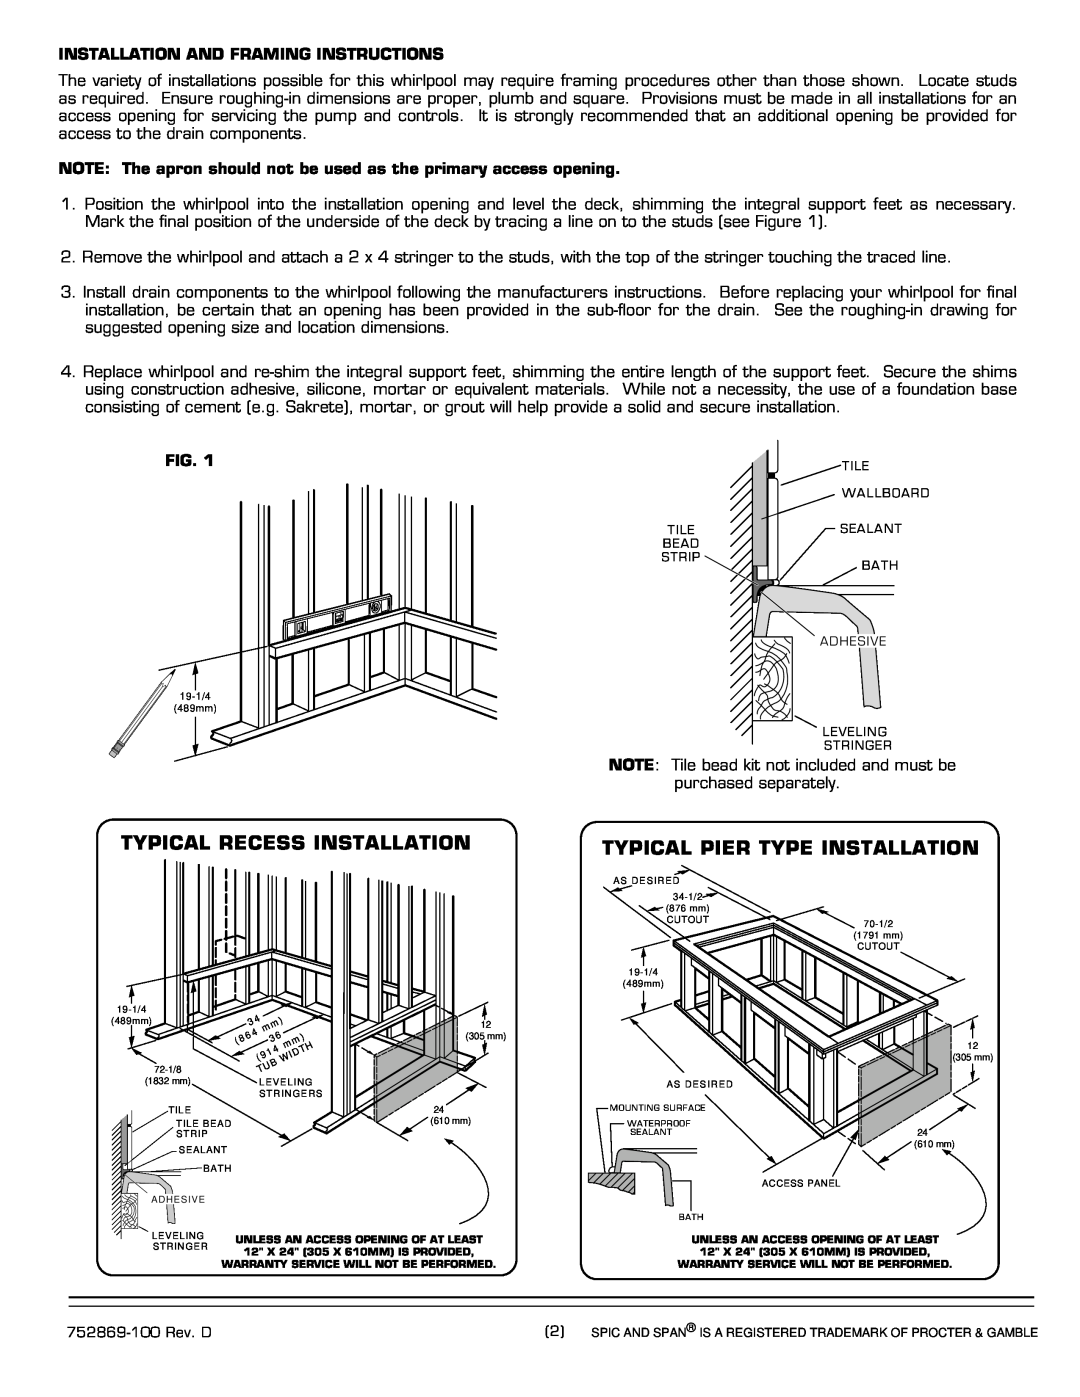 American Standard 7236E Series installation instructions Typical Recess Installation, Typical Pier Type Installation 